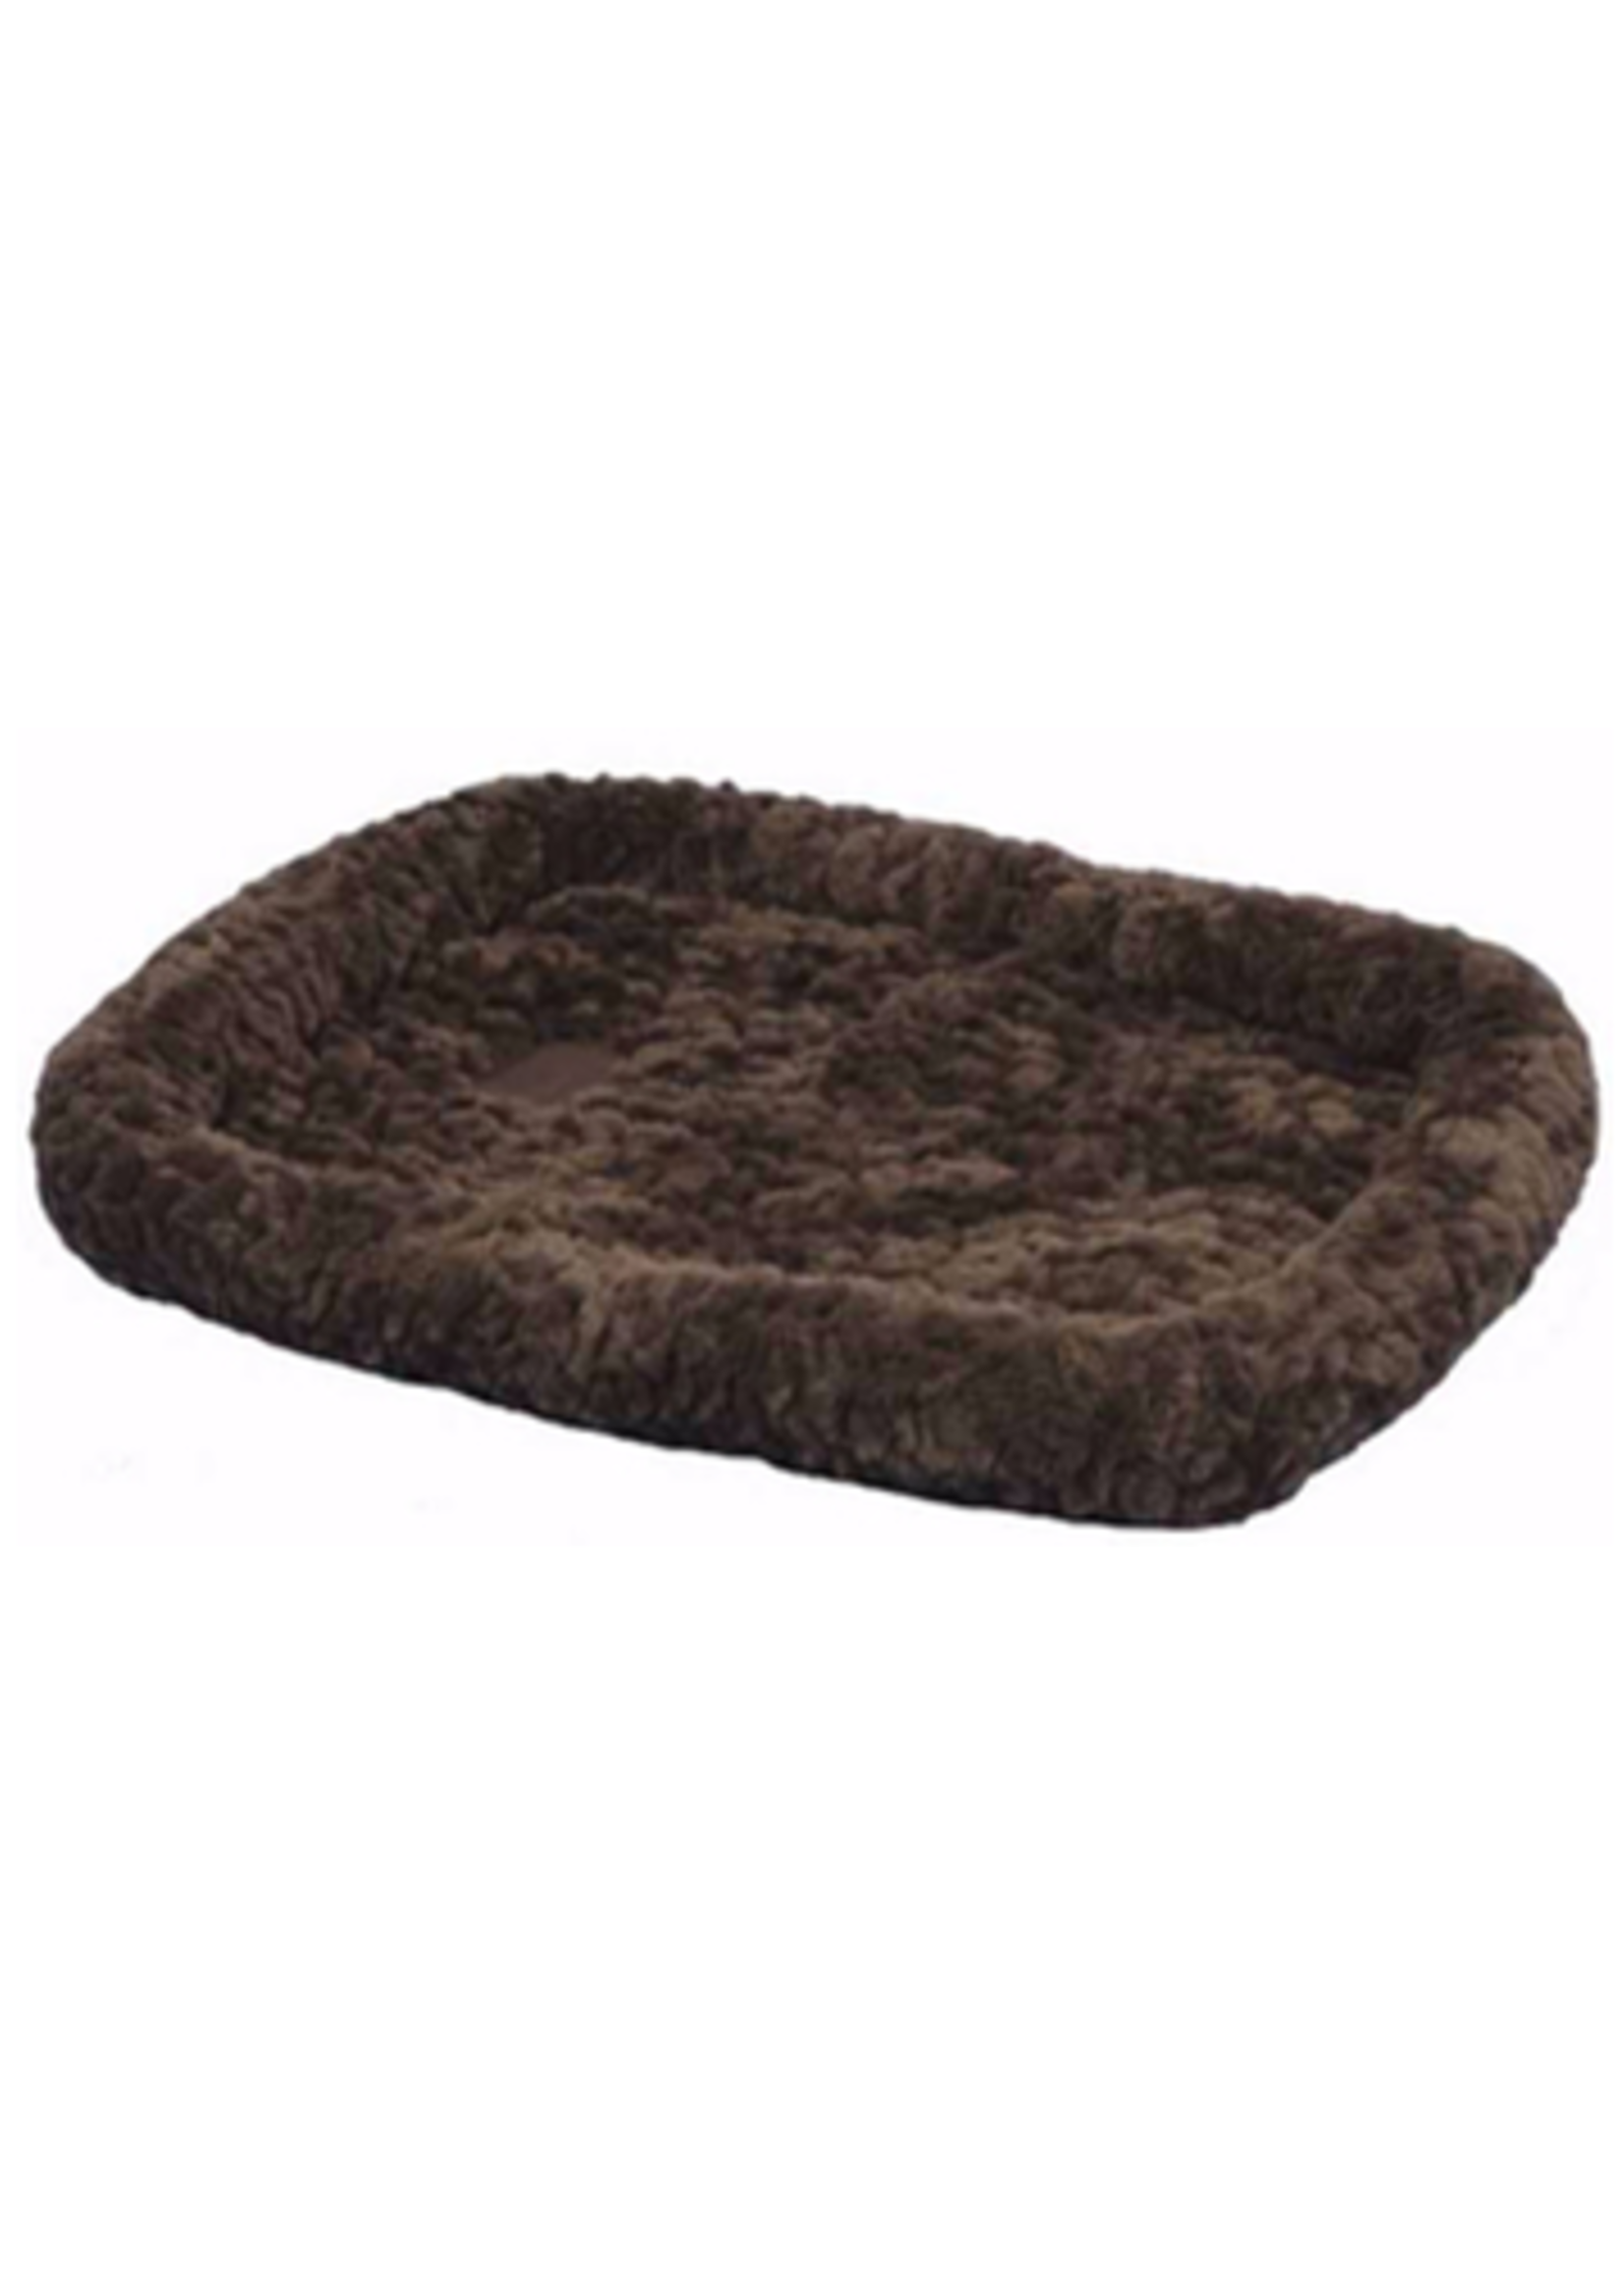 Precision® Precision Snoozzy Crate Bed Chocolate 45" x 32"